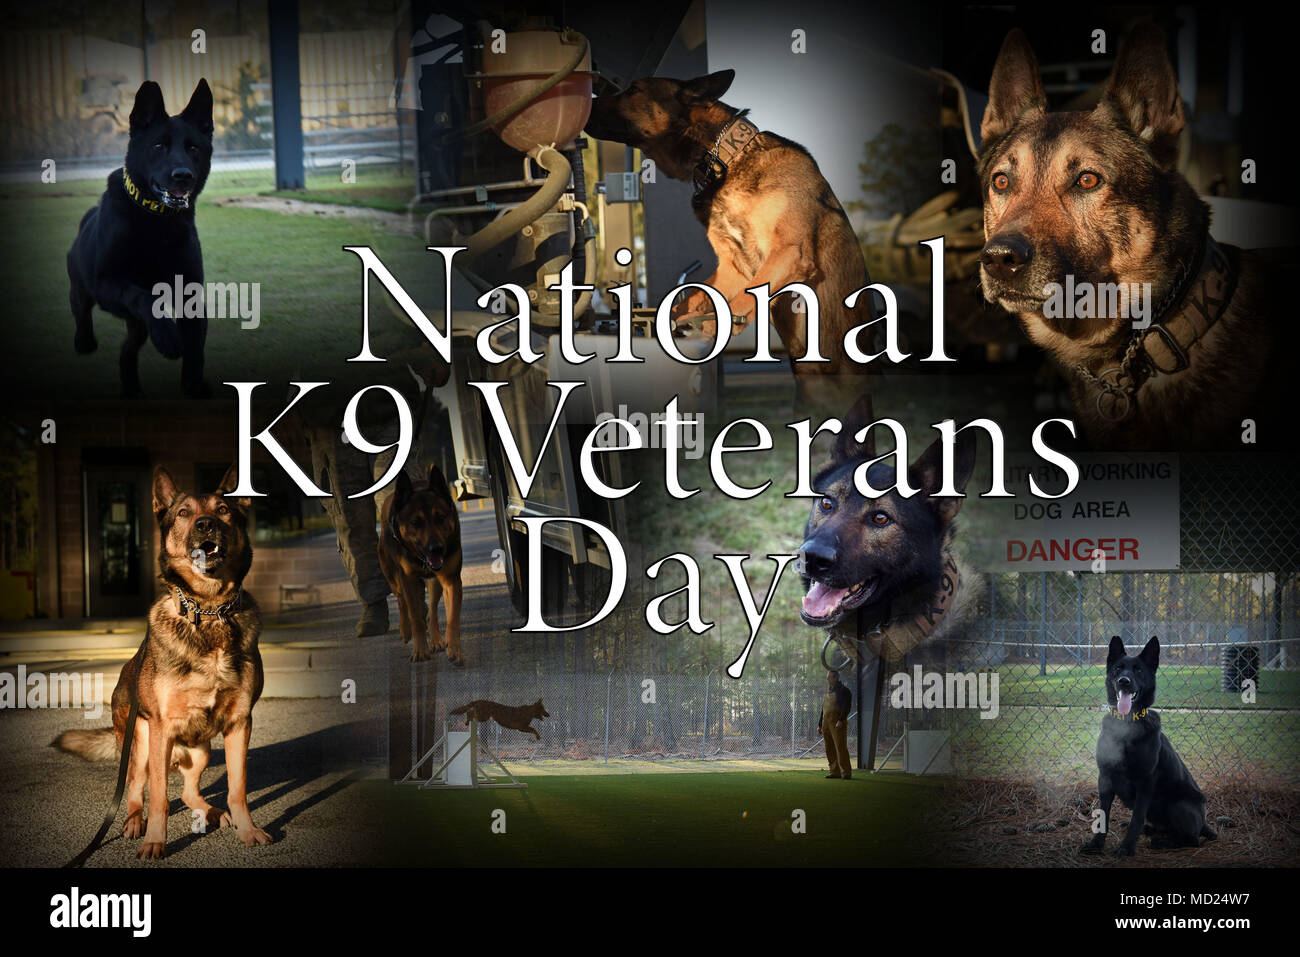 National K9 Veterans Day is March 13, 2018. U.S. Air Force Security